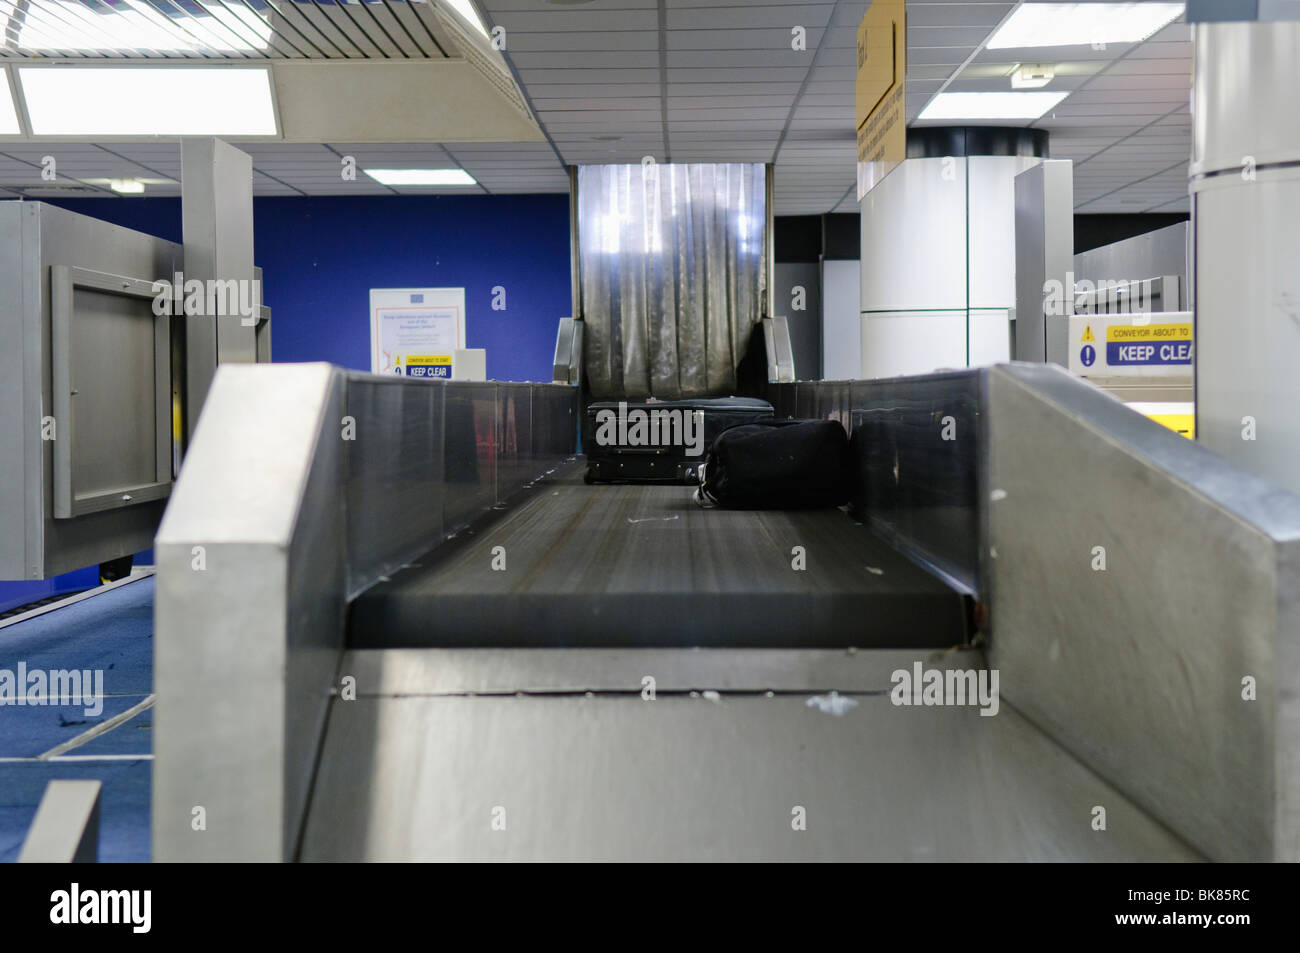 Baggage/Luggage on a luggage carousel at an airport Stock Photo